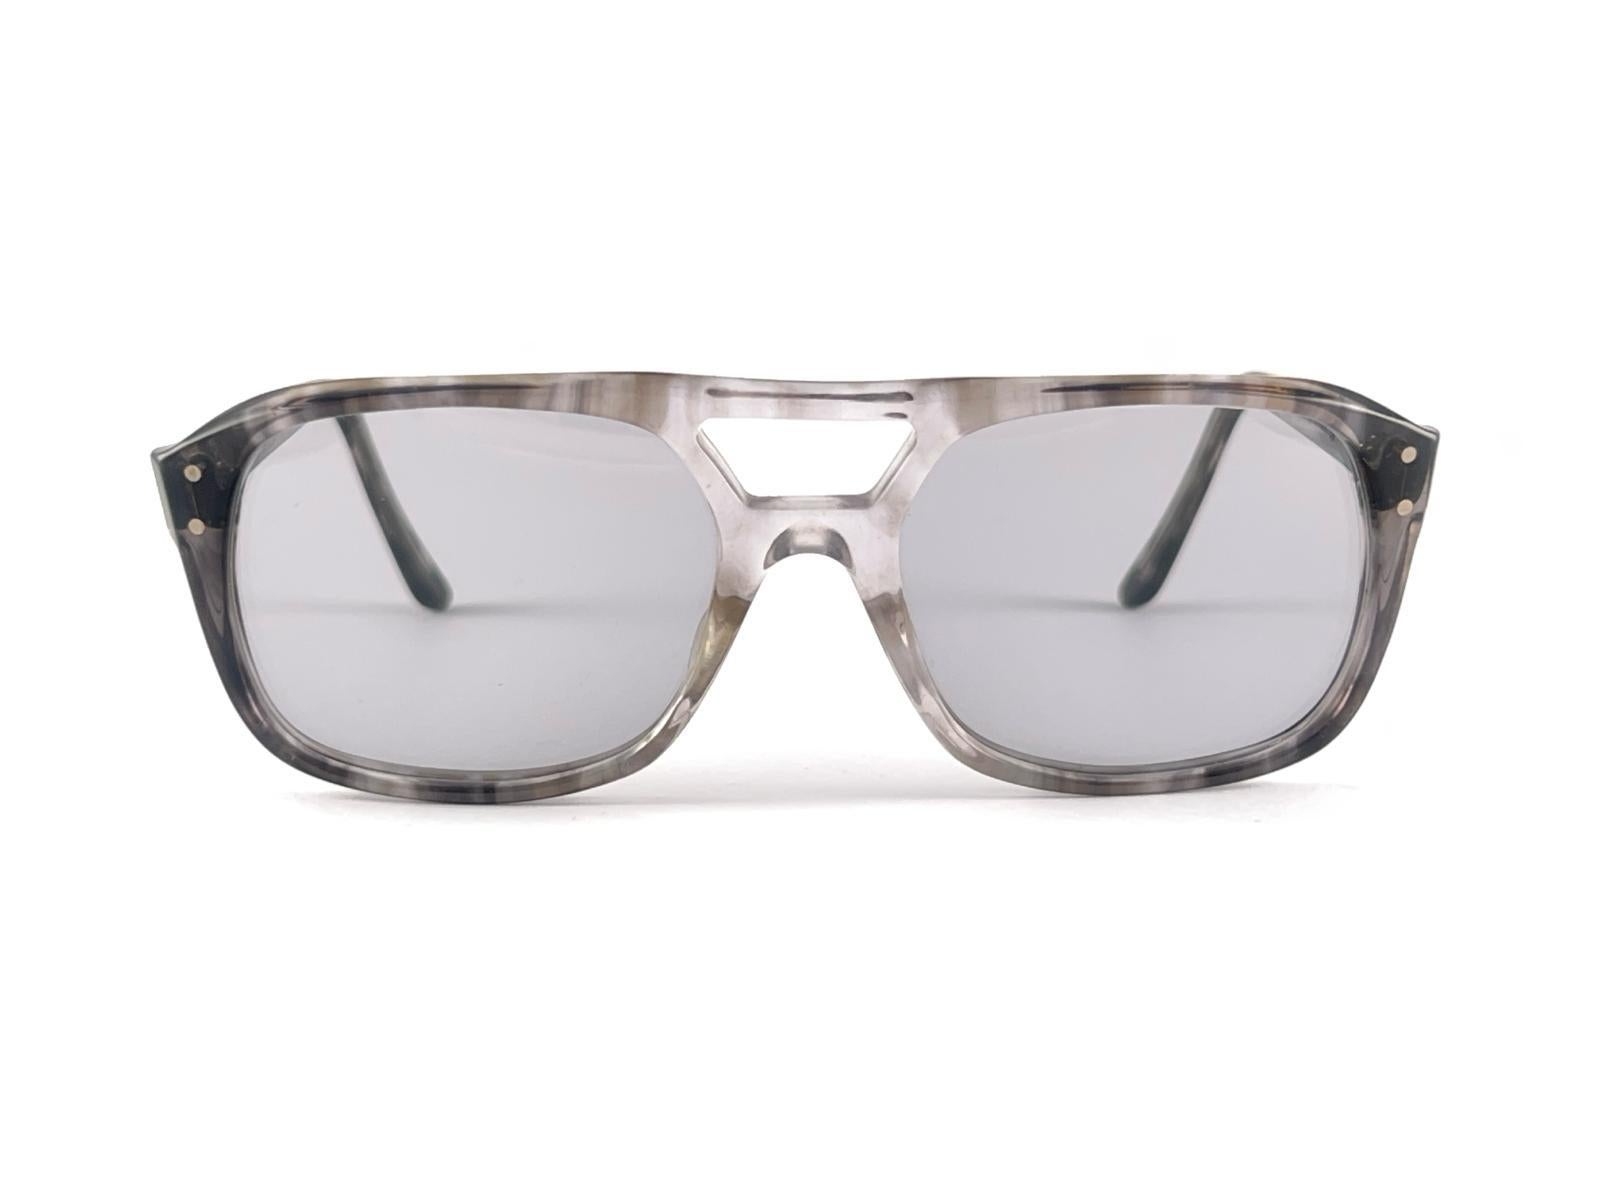 New Vintage American Optical Aerius Oversized Pilot Frame.
Light Grey lenses.
This item may show minor sign of wear due to more than 40 years of storage


Made In Usa


Front                                      14 Cms 
Lens Height                  